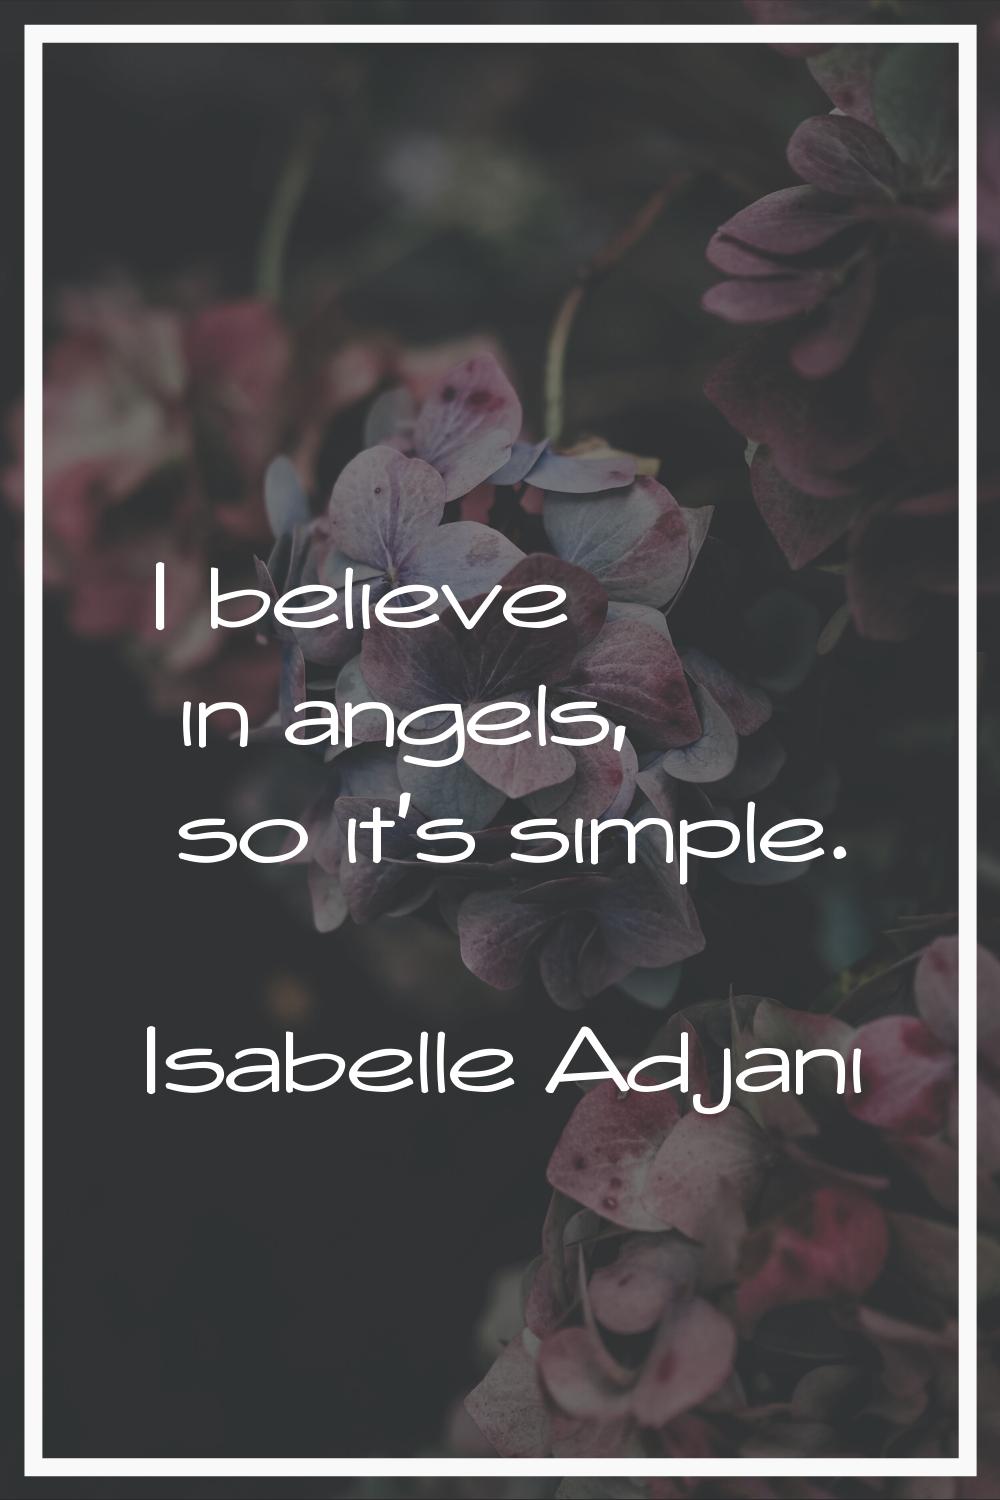 I believe in angels, so it's simple.